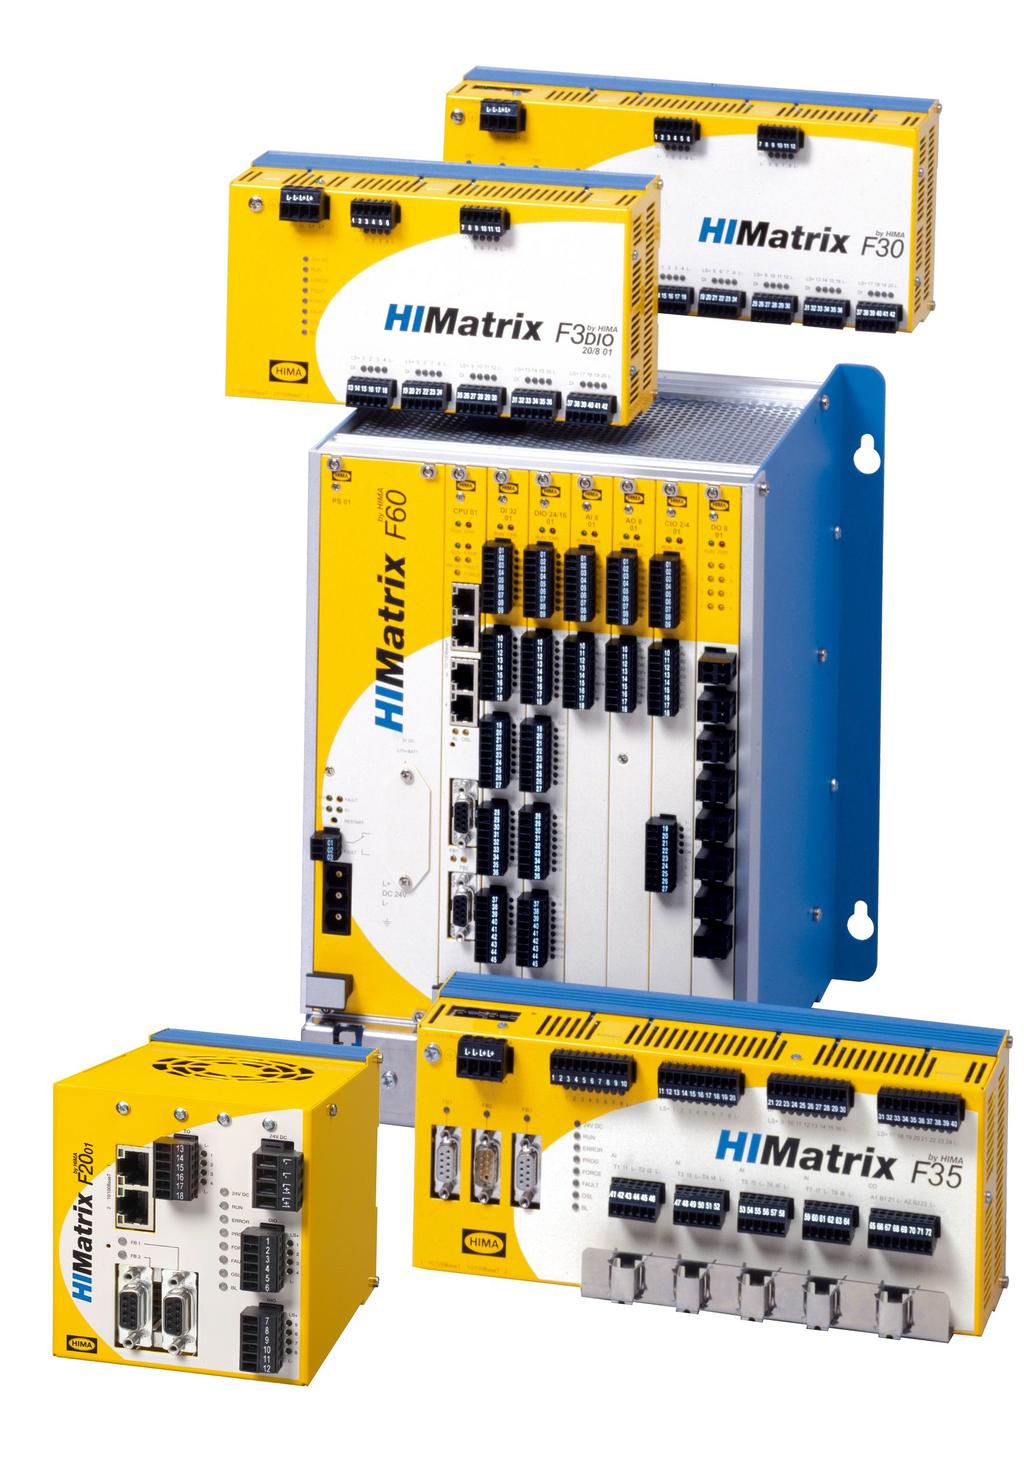 HIMatrix Safety-Related